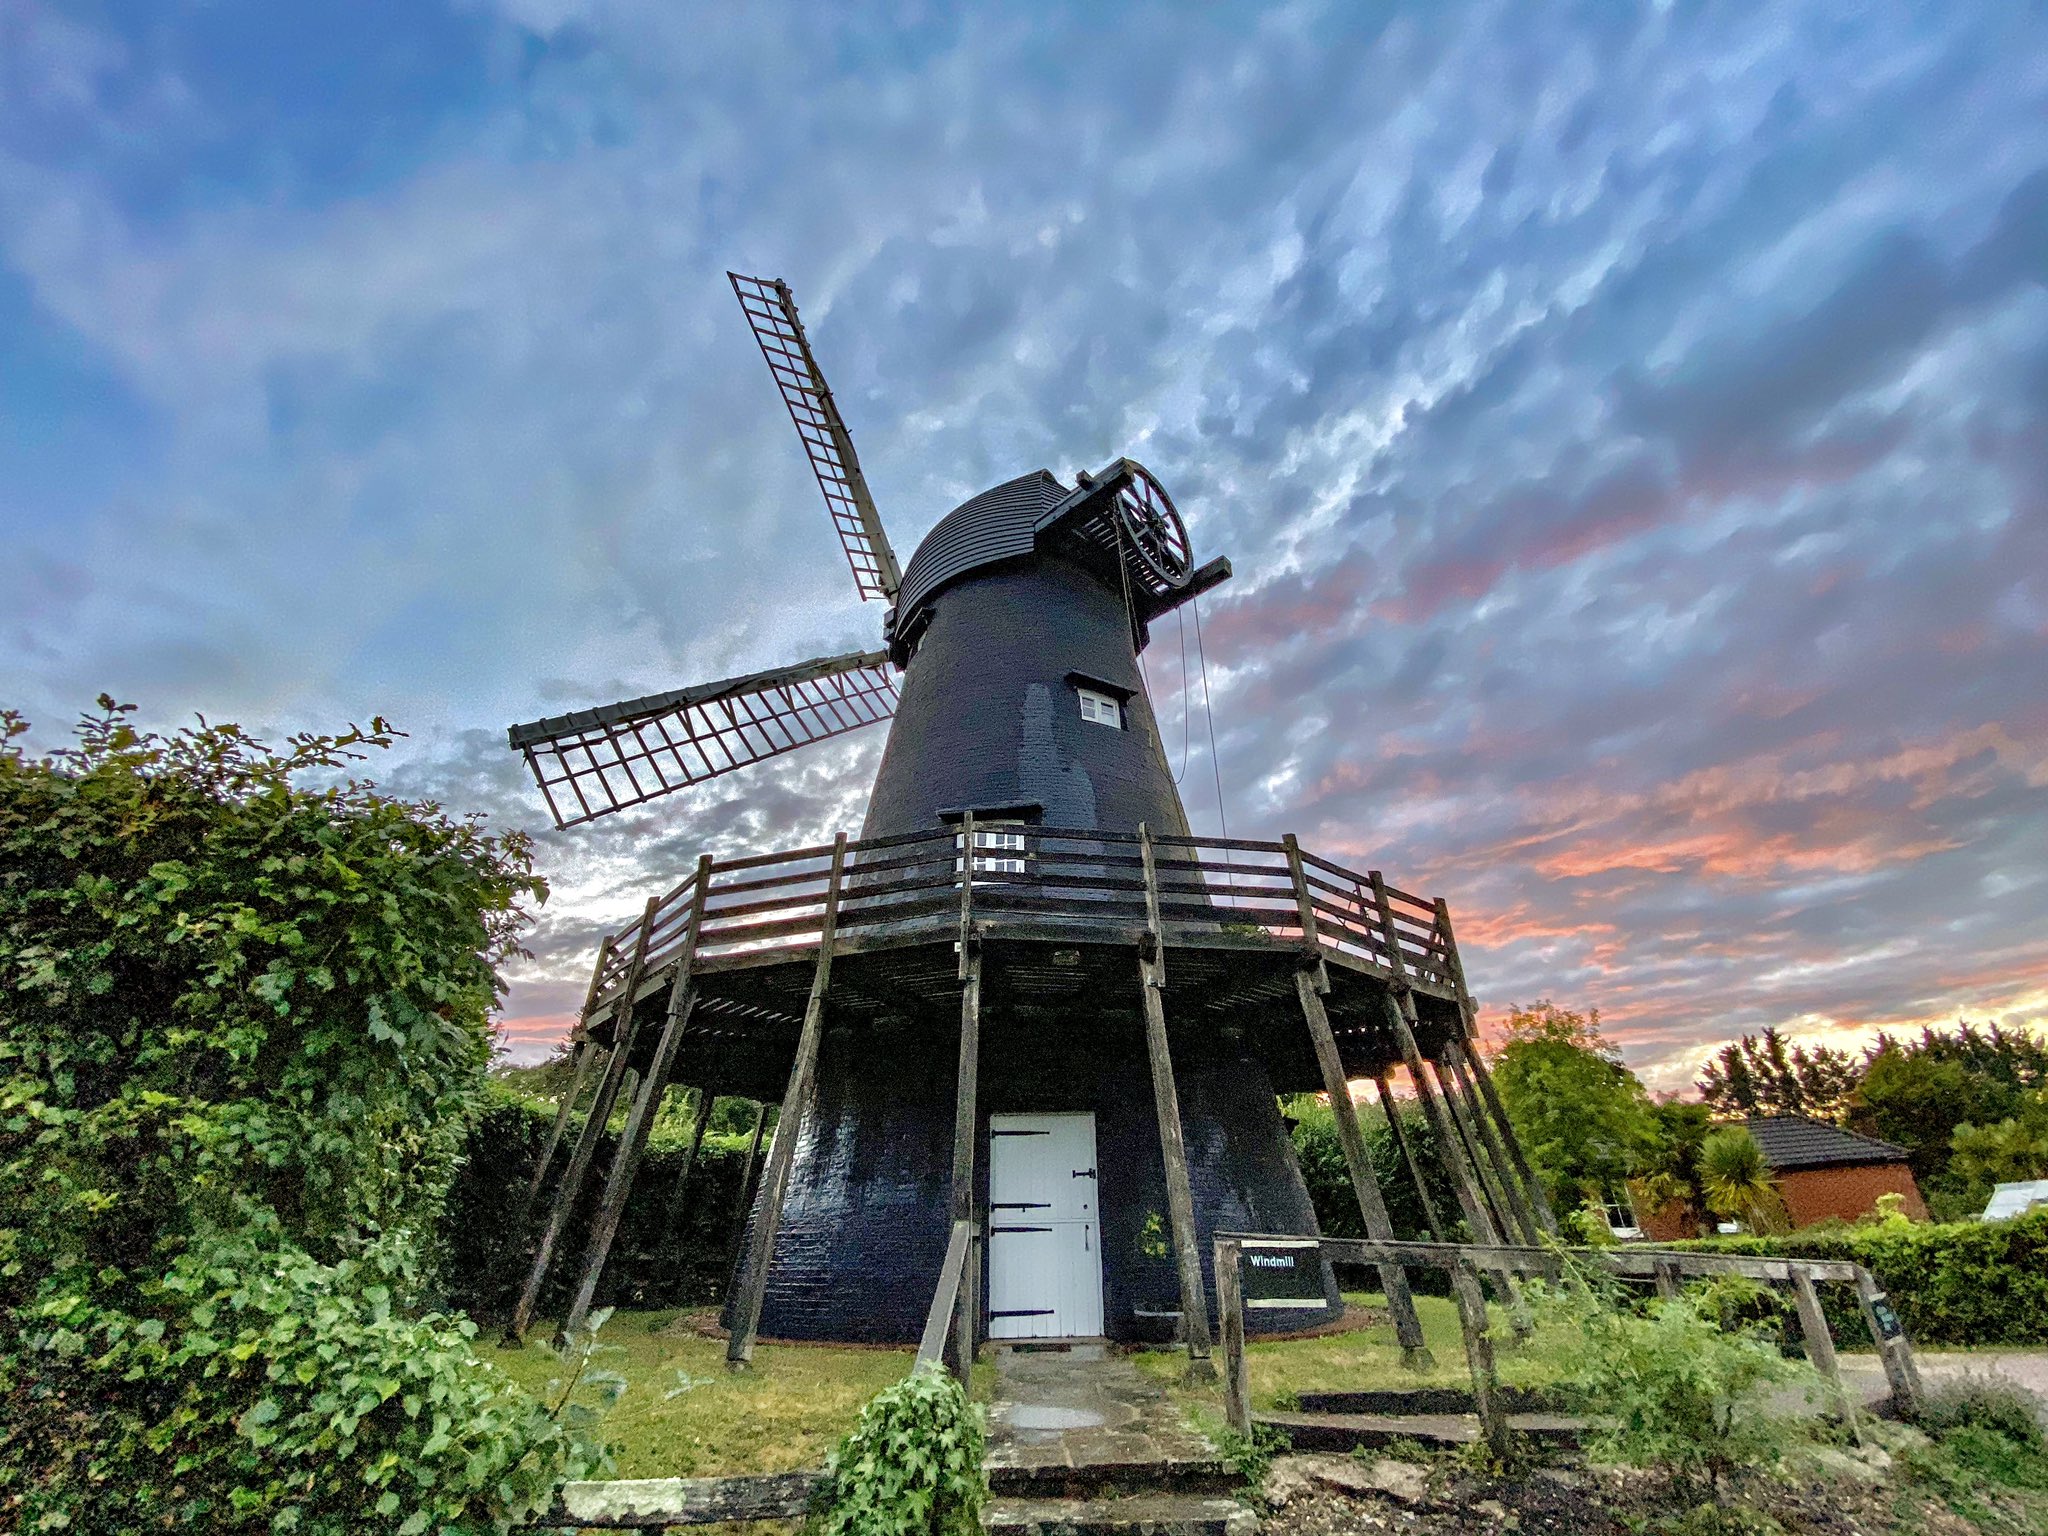 2nd Place Bursledon Windmill in Southampton after the rain had cleared by SOLOwePhotography @SOLowePhotogra1